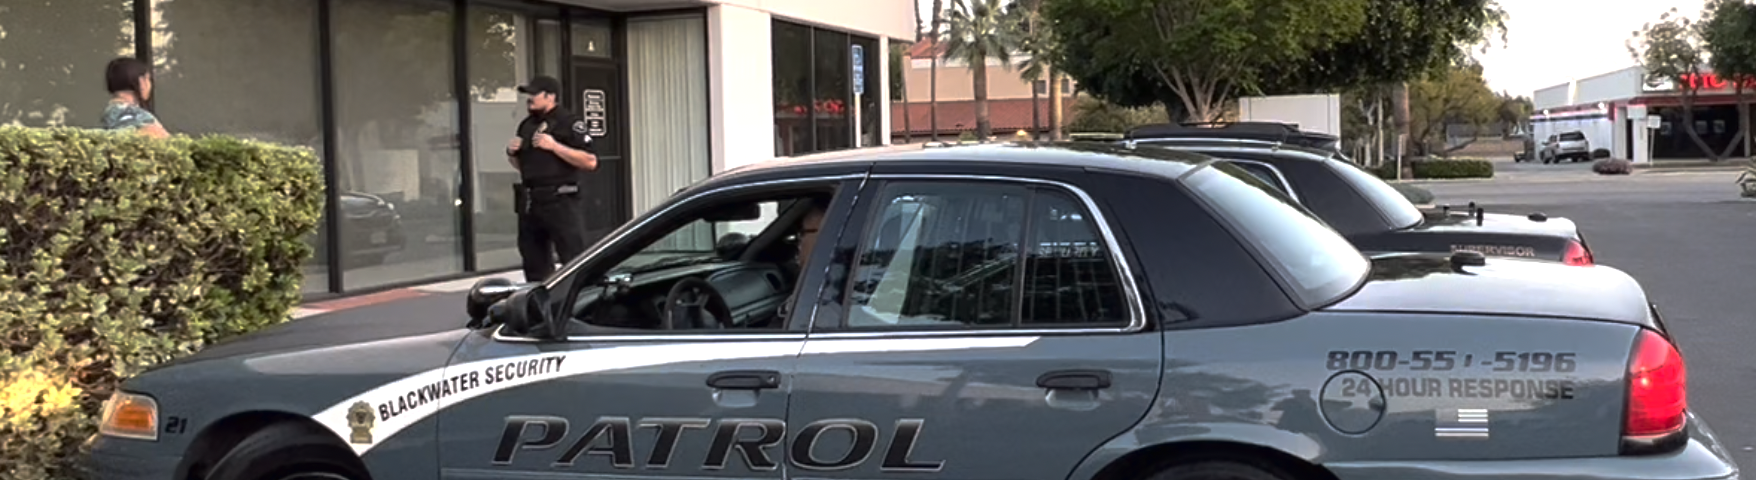 Get Mobile Patrol Guards, Alarm Response, & Police Liaison In Inland Empire, CA